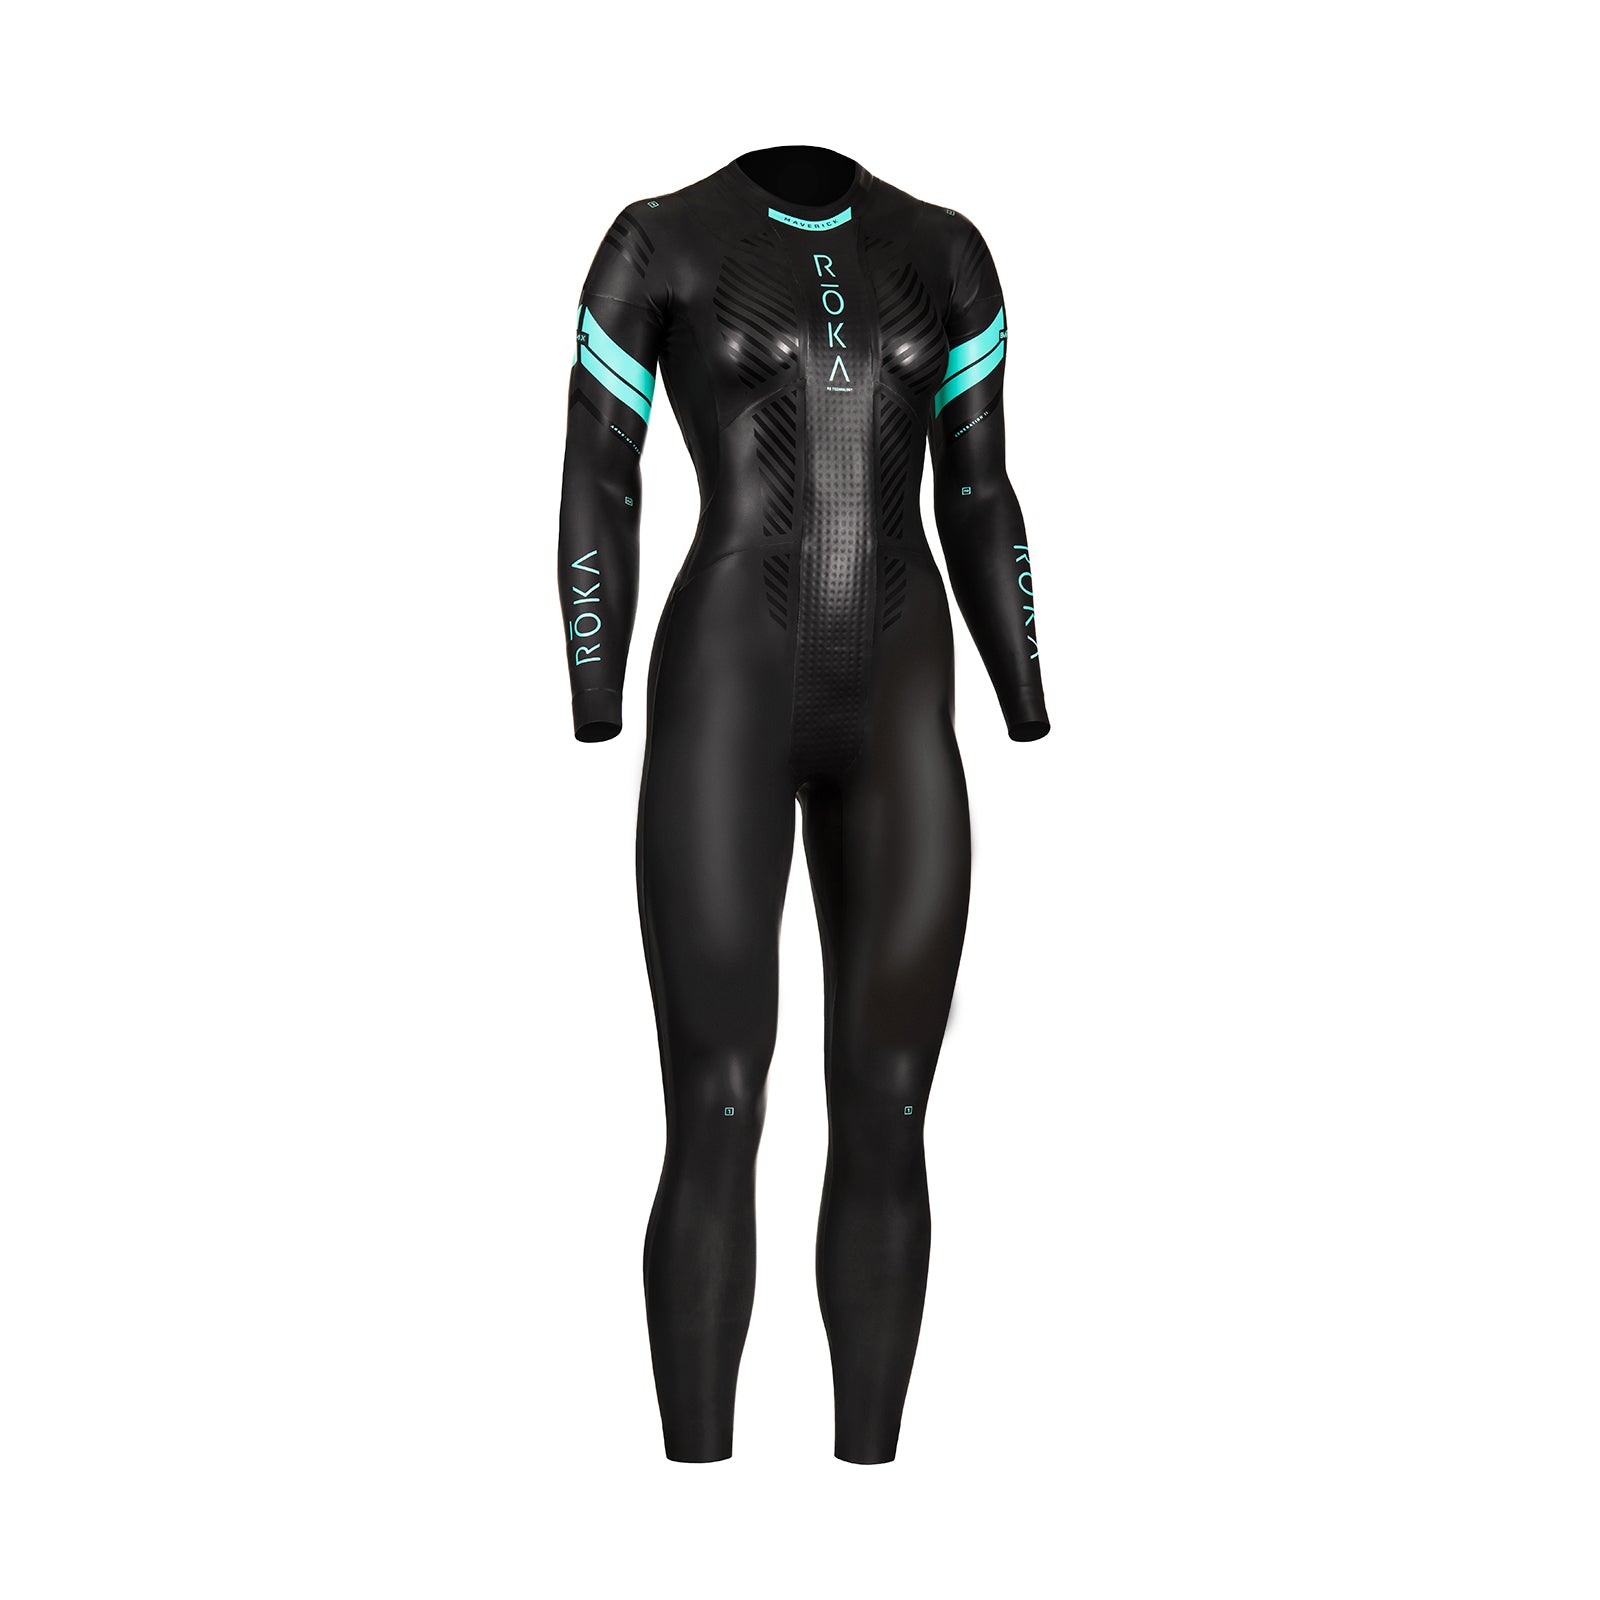 Neoprene Swimsuit Optimized For Speed And Performance 